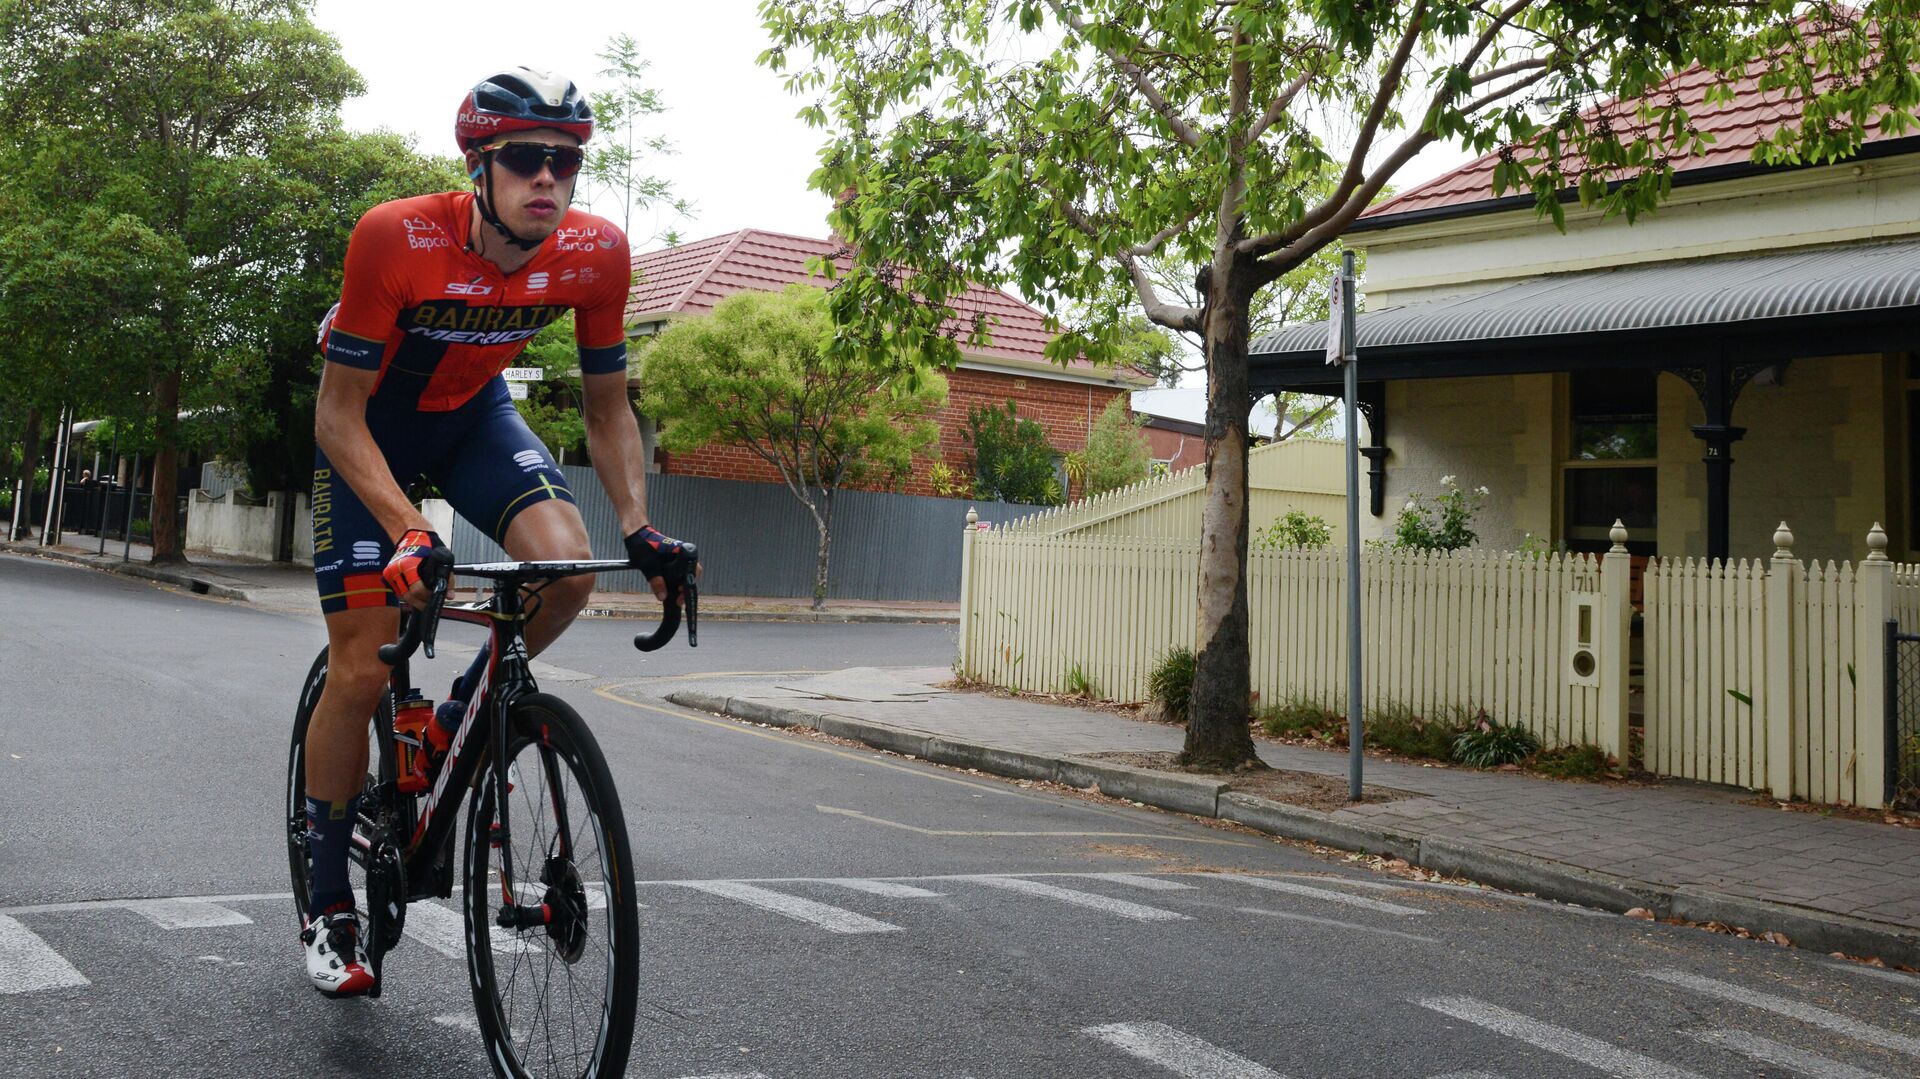 German rider Phil Bauhaus from the Bahrain-Merida team rides through the back streets of suburban Unlley prior to the start of stage four of the Tour Down Under cycling race in Adelaide on January 18, 2019. (Photo by Brenton EDWARDS / AFP) / -- IMAGE RESTRICTED TO EDITORIAL USE - STRICTLY NO COMMERCIAL USE -- - РИА Новости, 1920, 09.08.2021